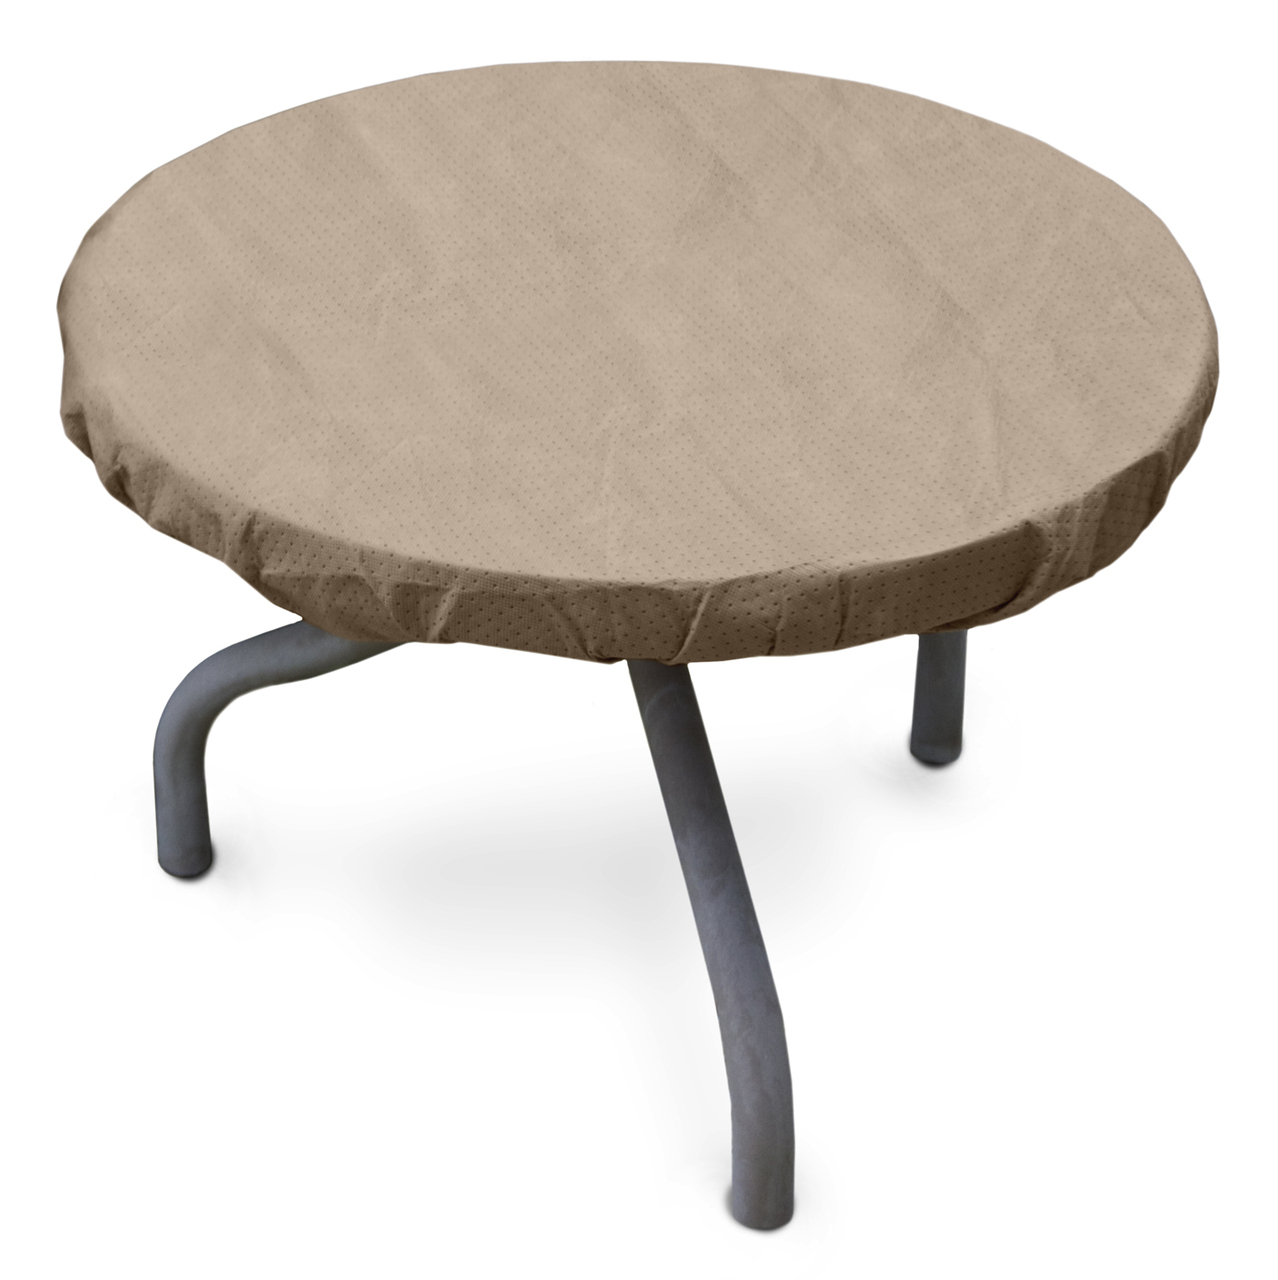 Round Table Top Cover -30 in.